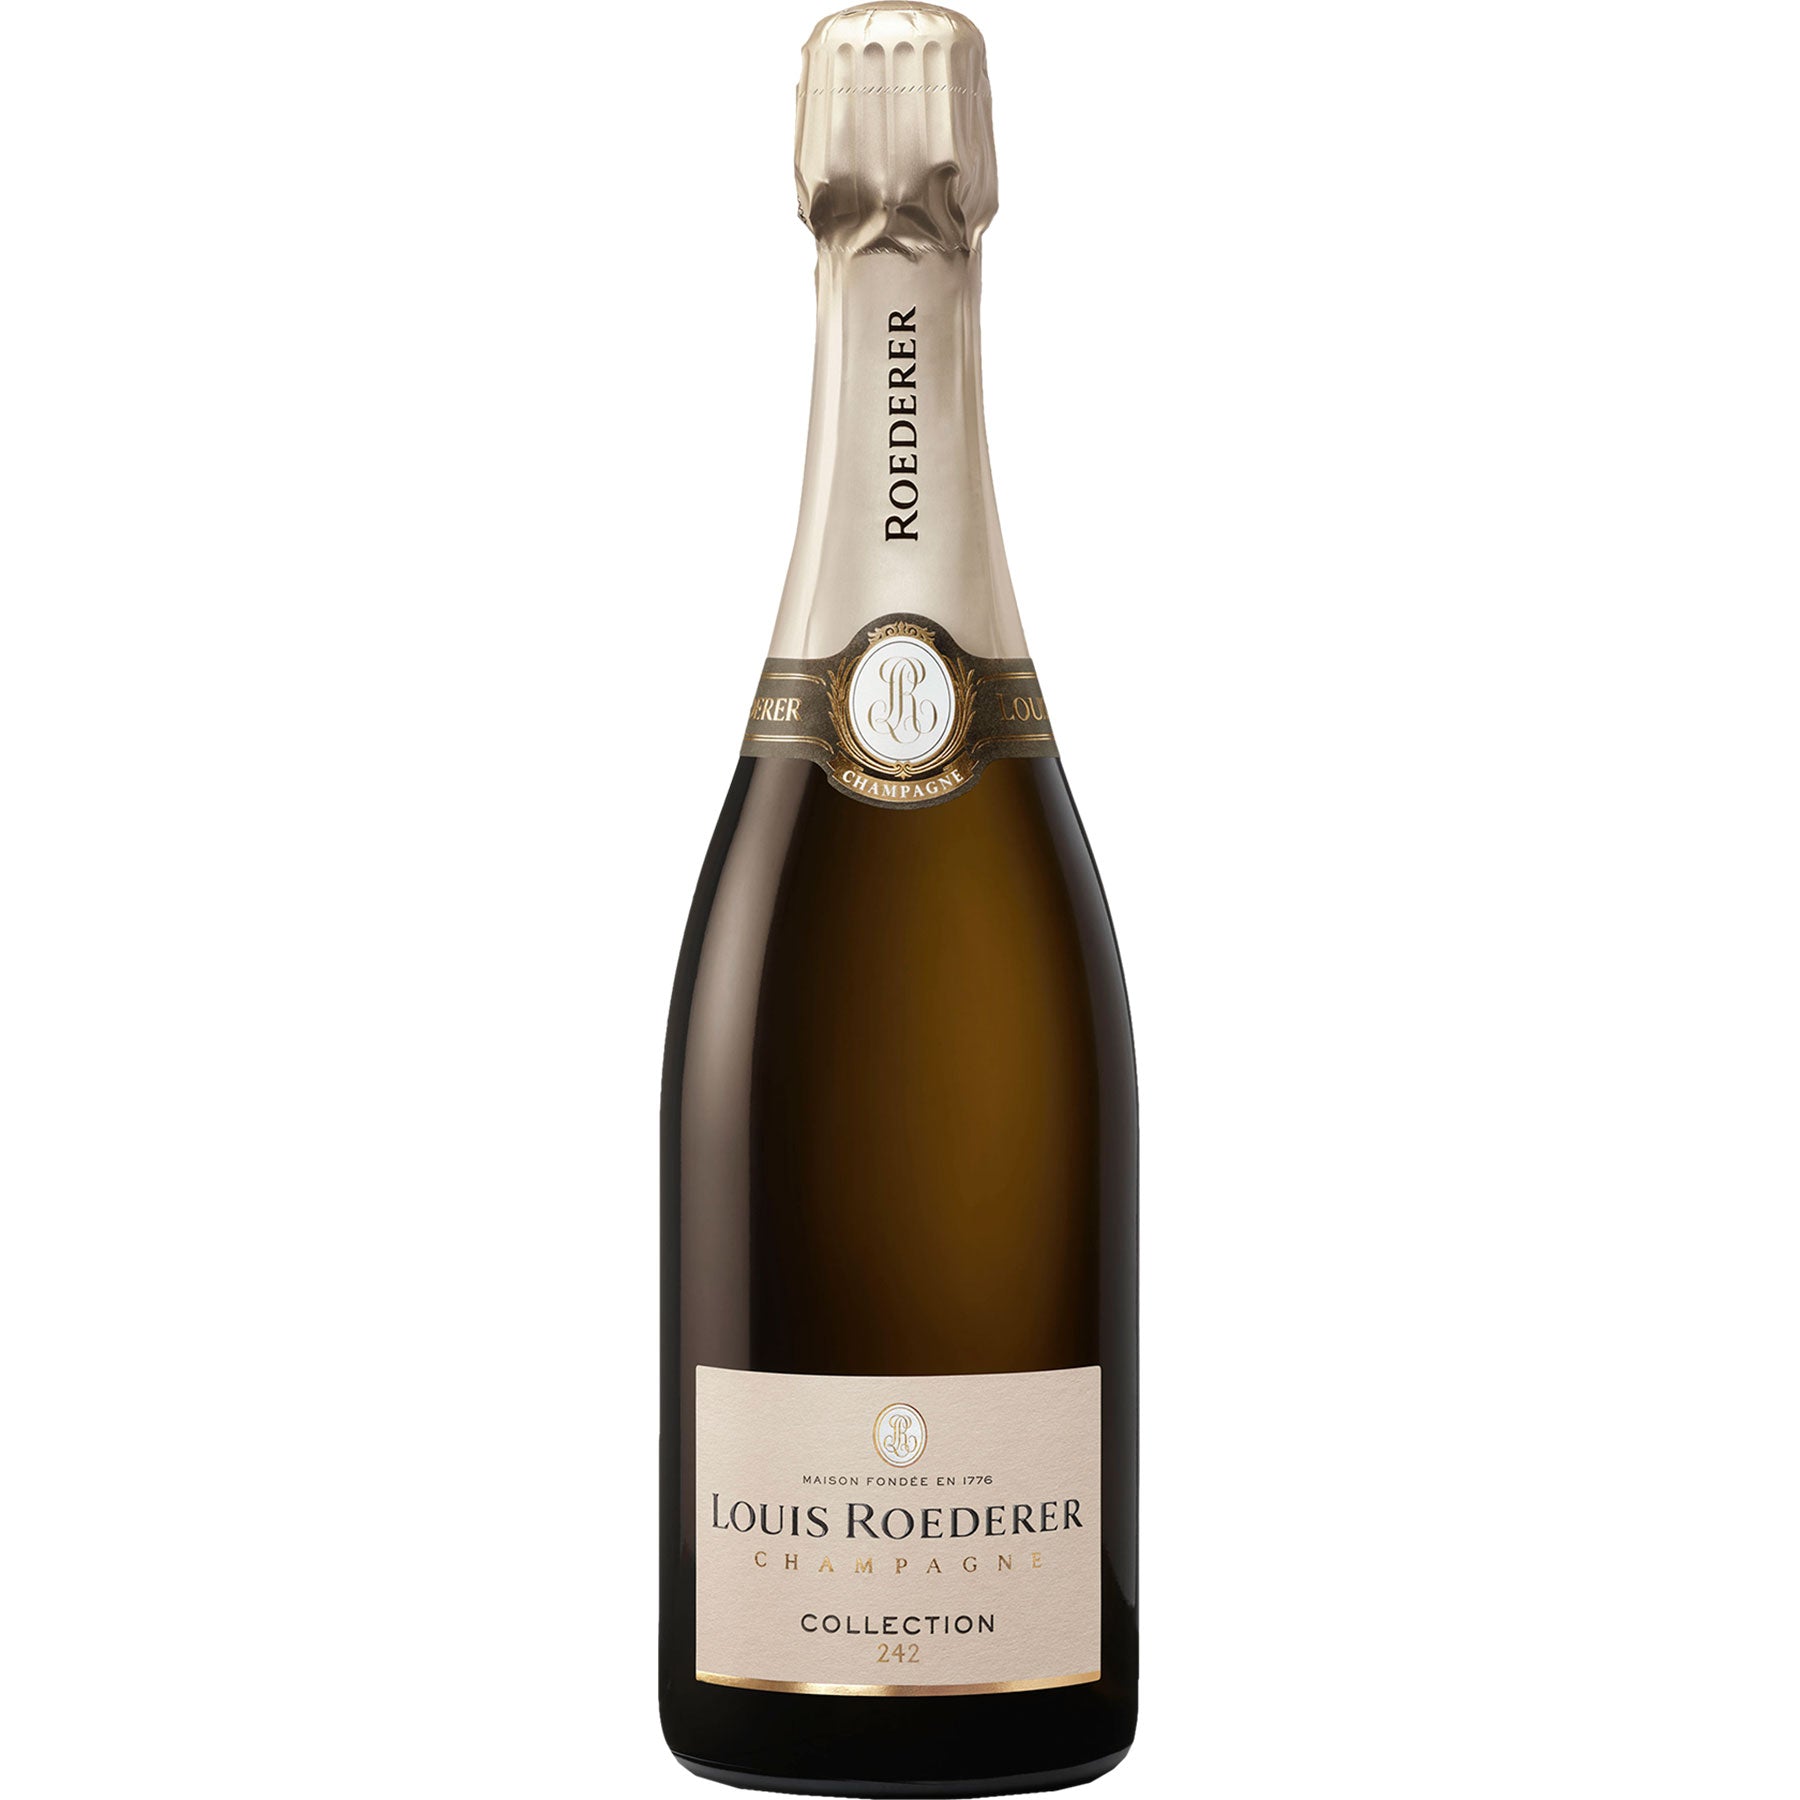 Louis Roederer Champagne Collection 242 750ml